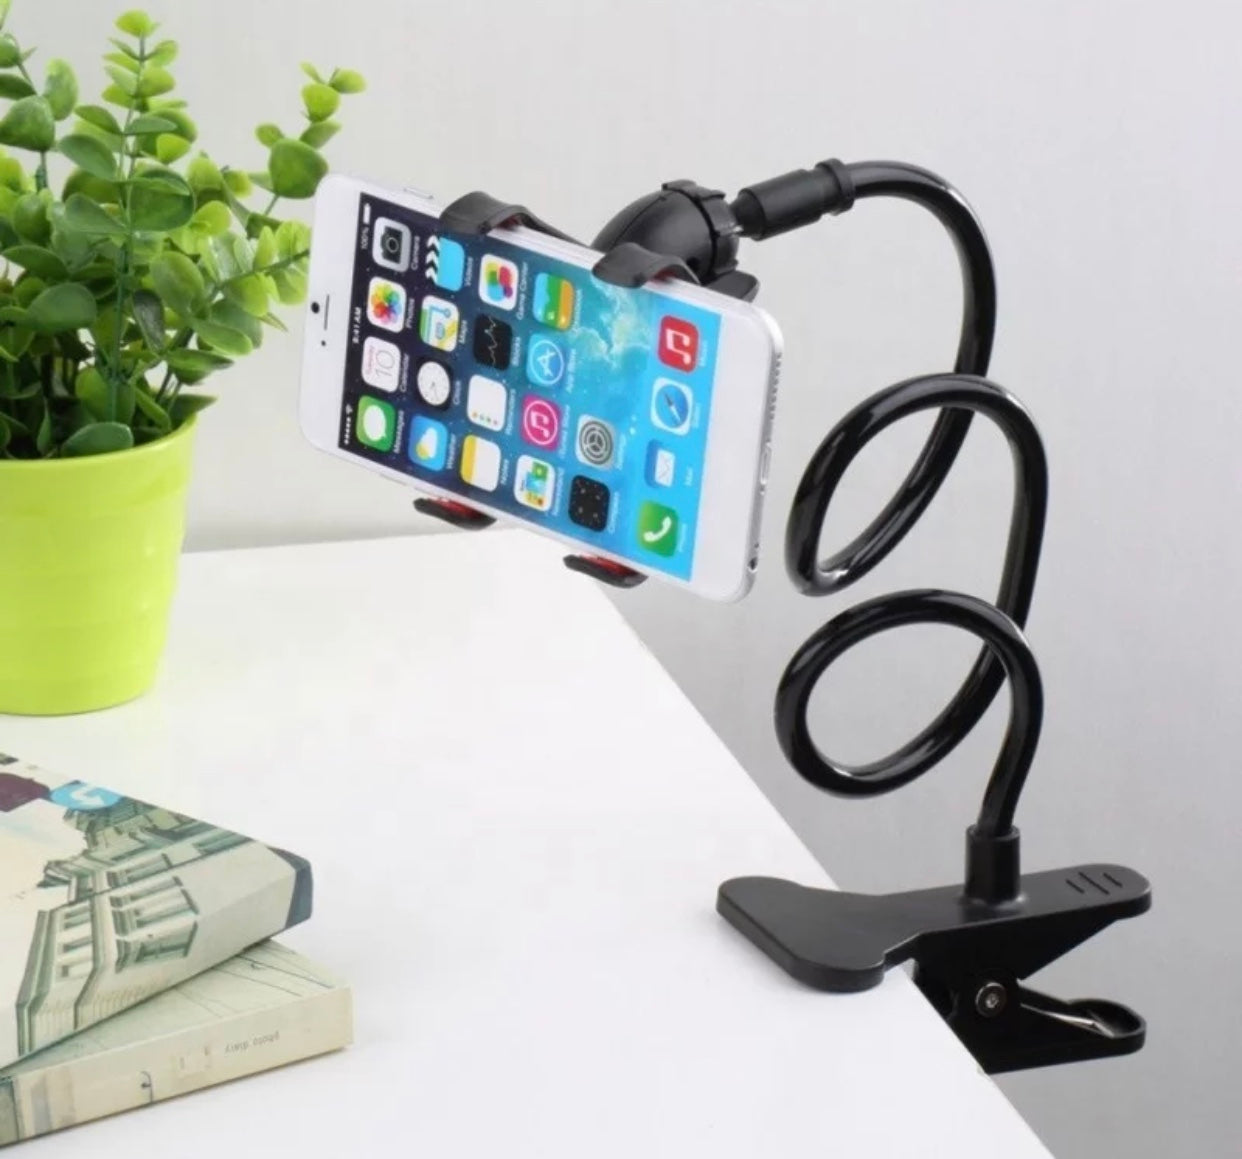 Phone Holder Adjustable Gooseneck 360 Degrees Rotation Flexible to adjust the position at an ideal distance and comfortable angle for easy viewing.